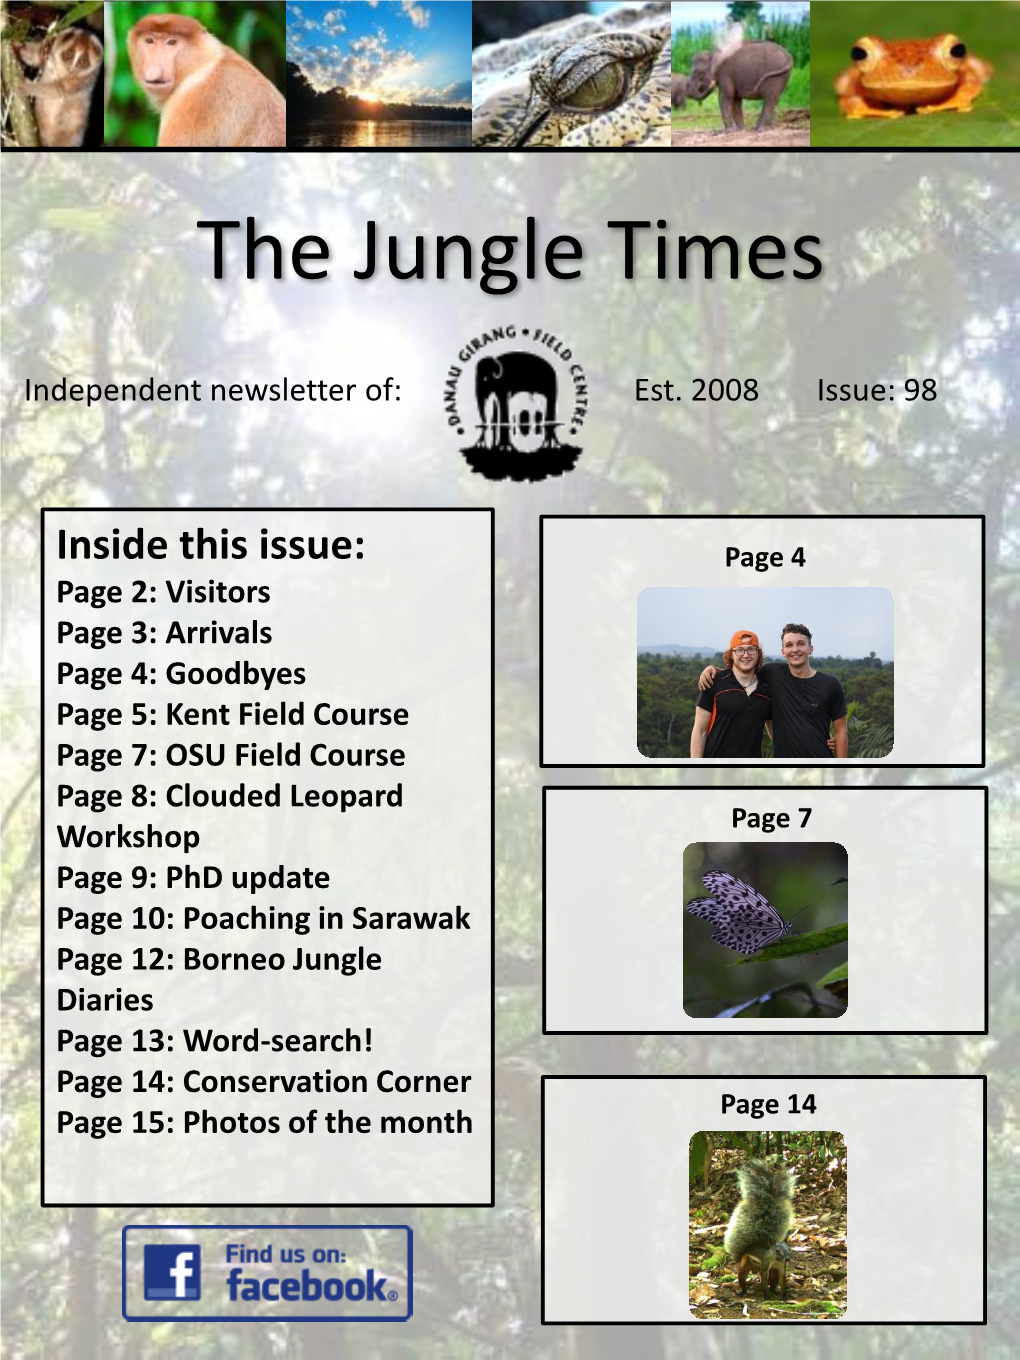 The Jungle Times